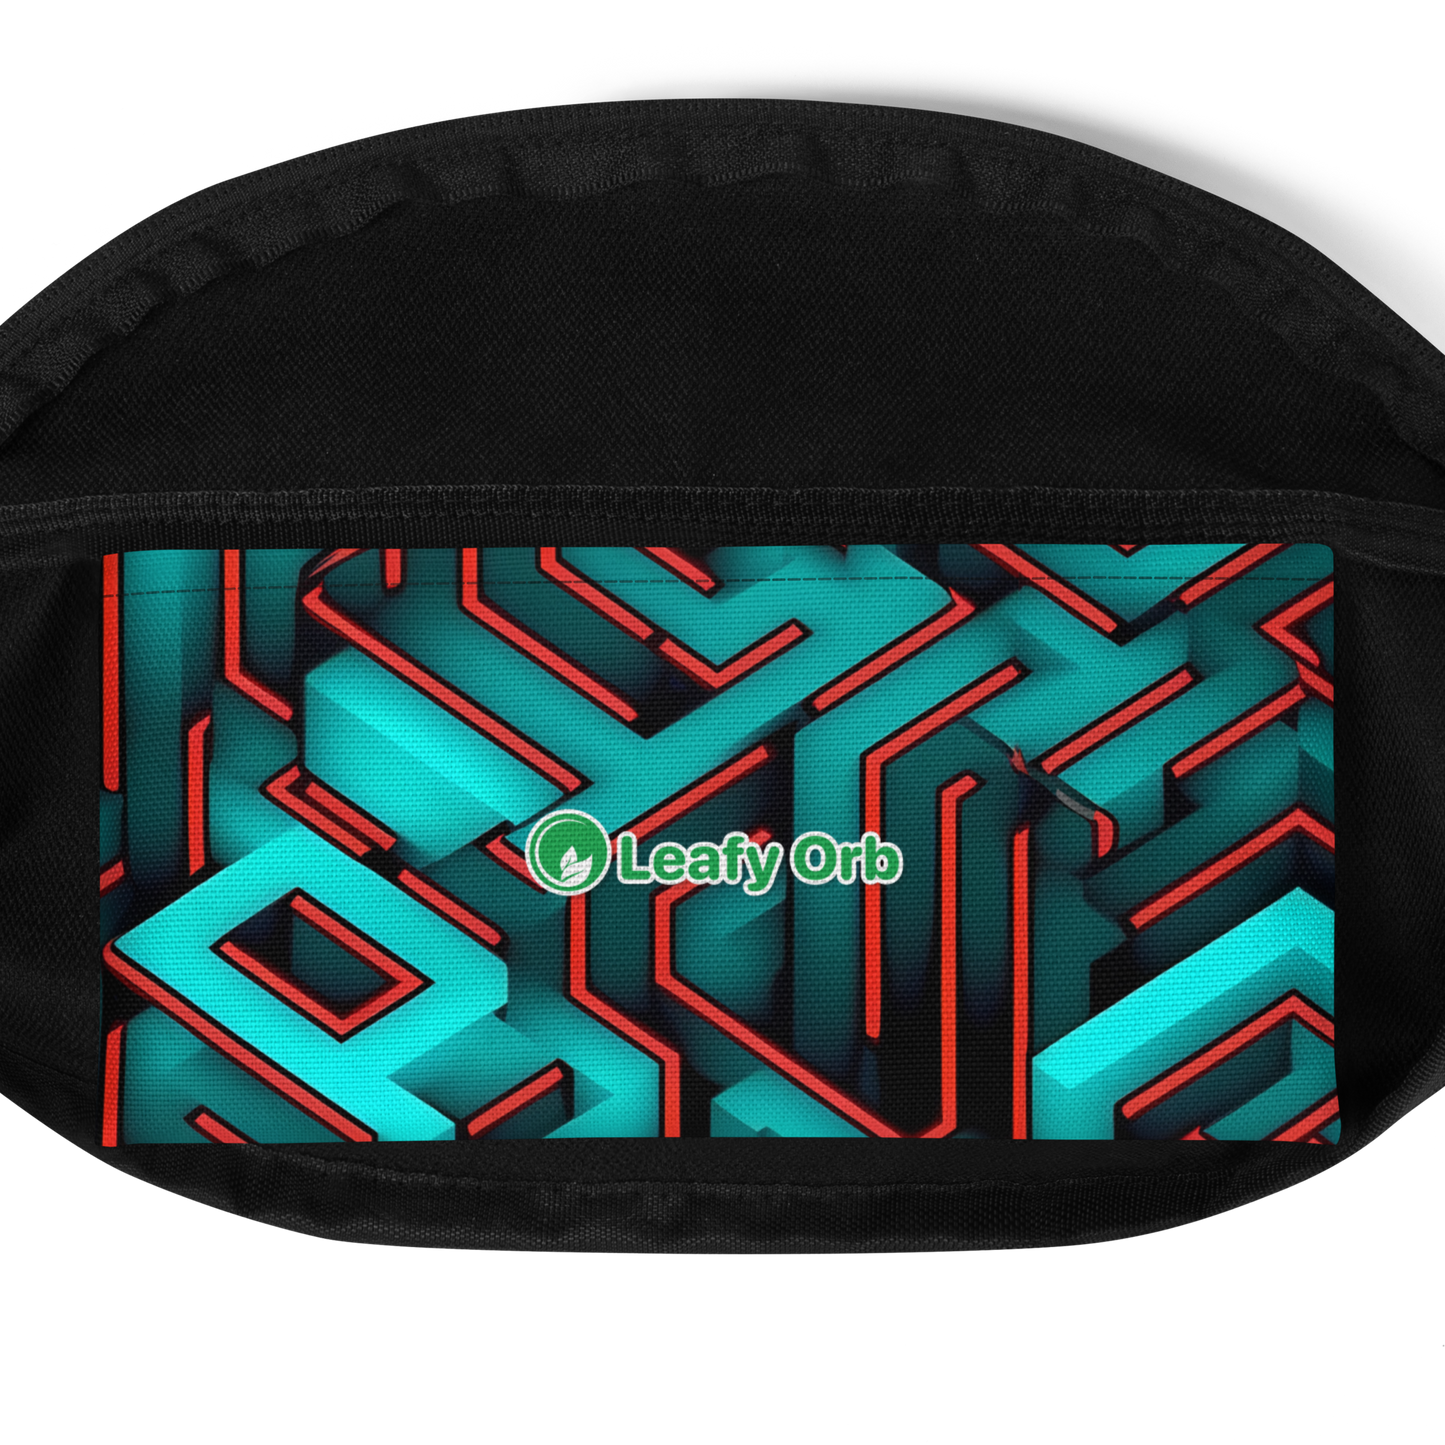 3D Maze Illusion | 3D Patterns | All-Over Print Fanny Pack - #2